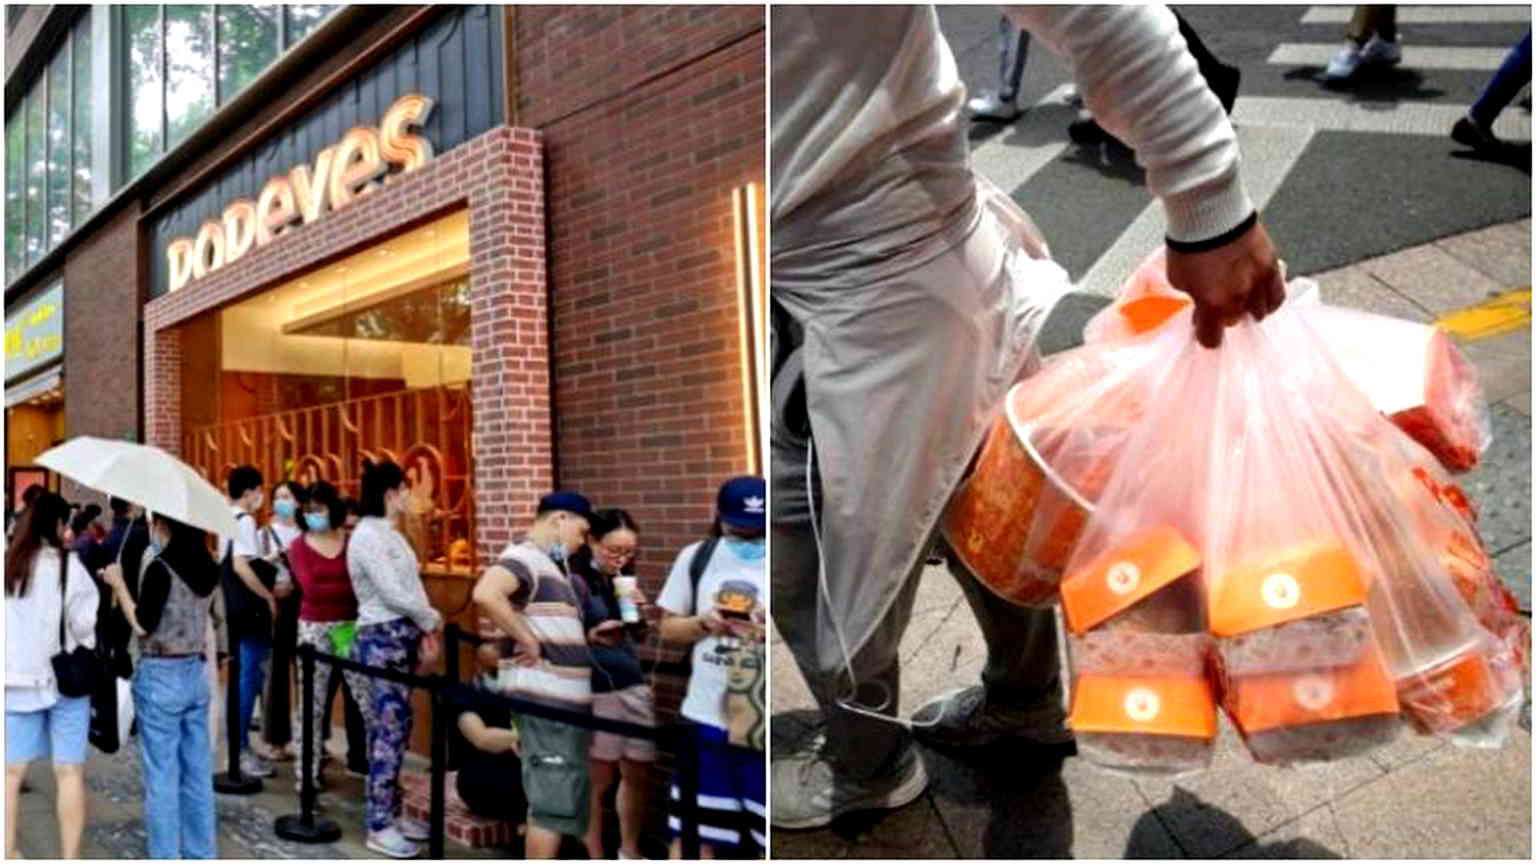 China’s First Popeyes Opens to Massive Crowds With Face Masks On